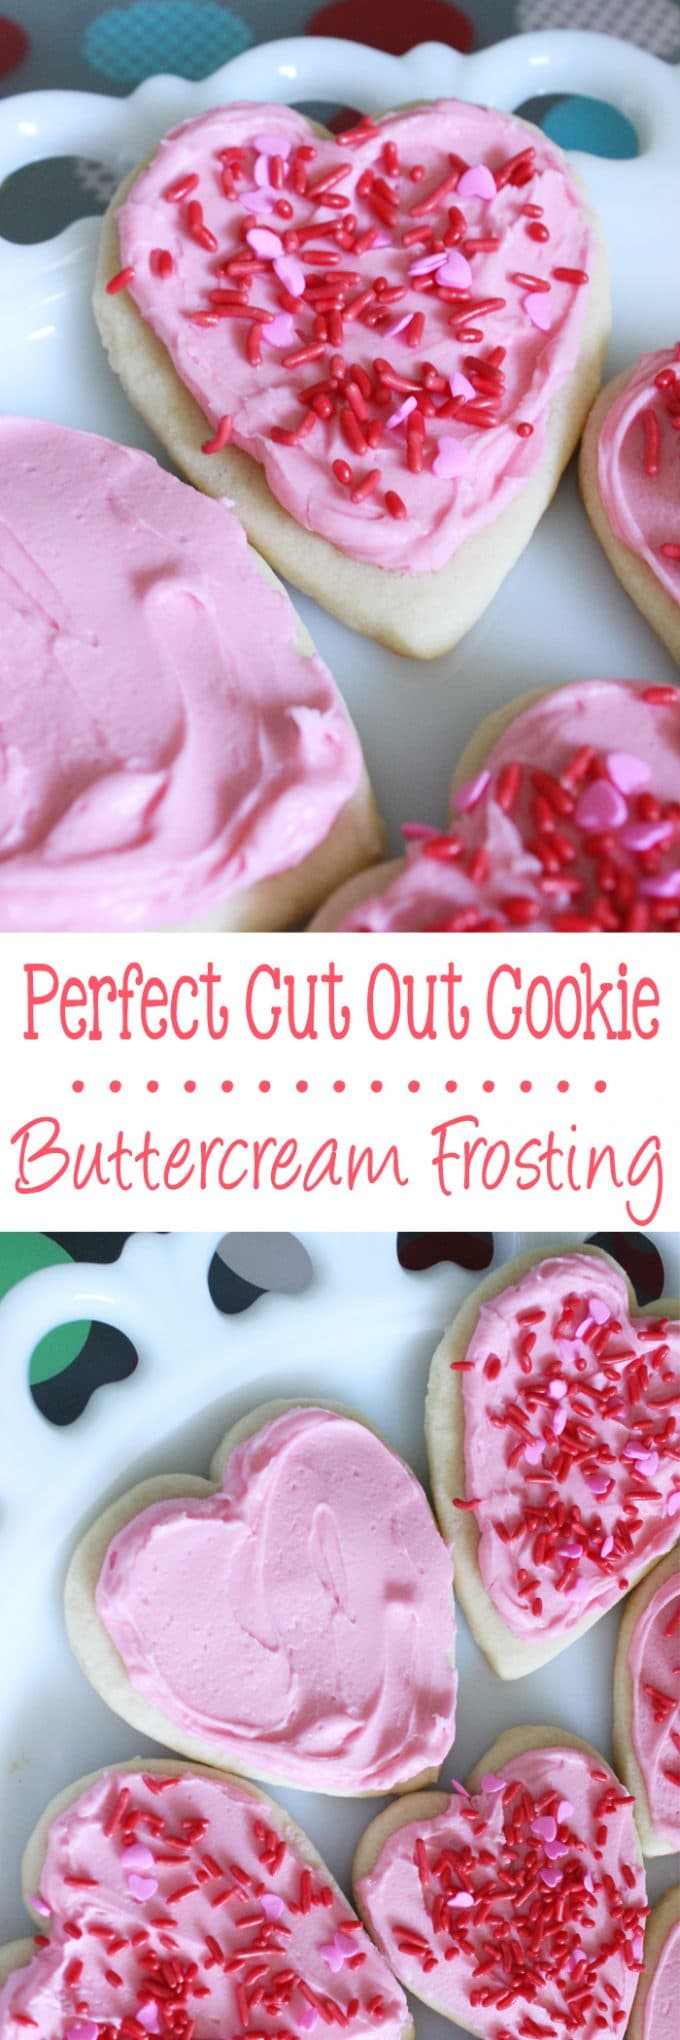 This simple Perfect Cut Out Cookie Buttercream Frosting is made with 4 ingredients and tastes amazing! | EverydayMadeFresh.com